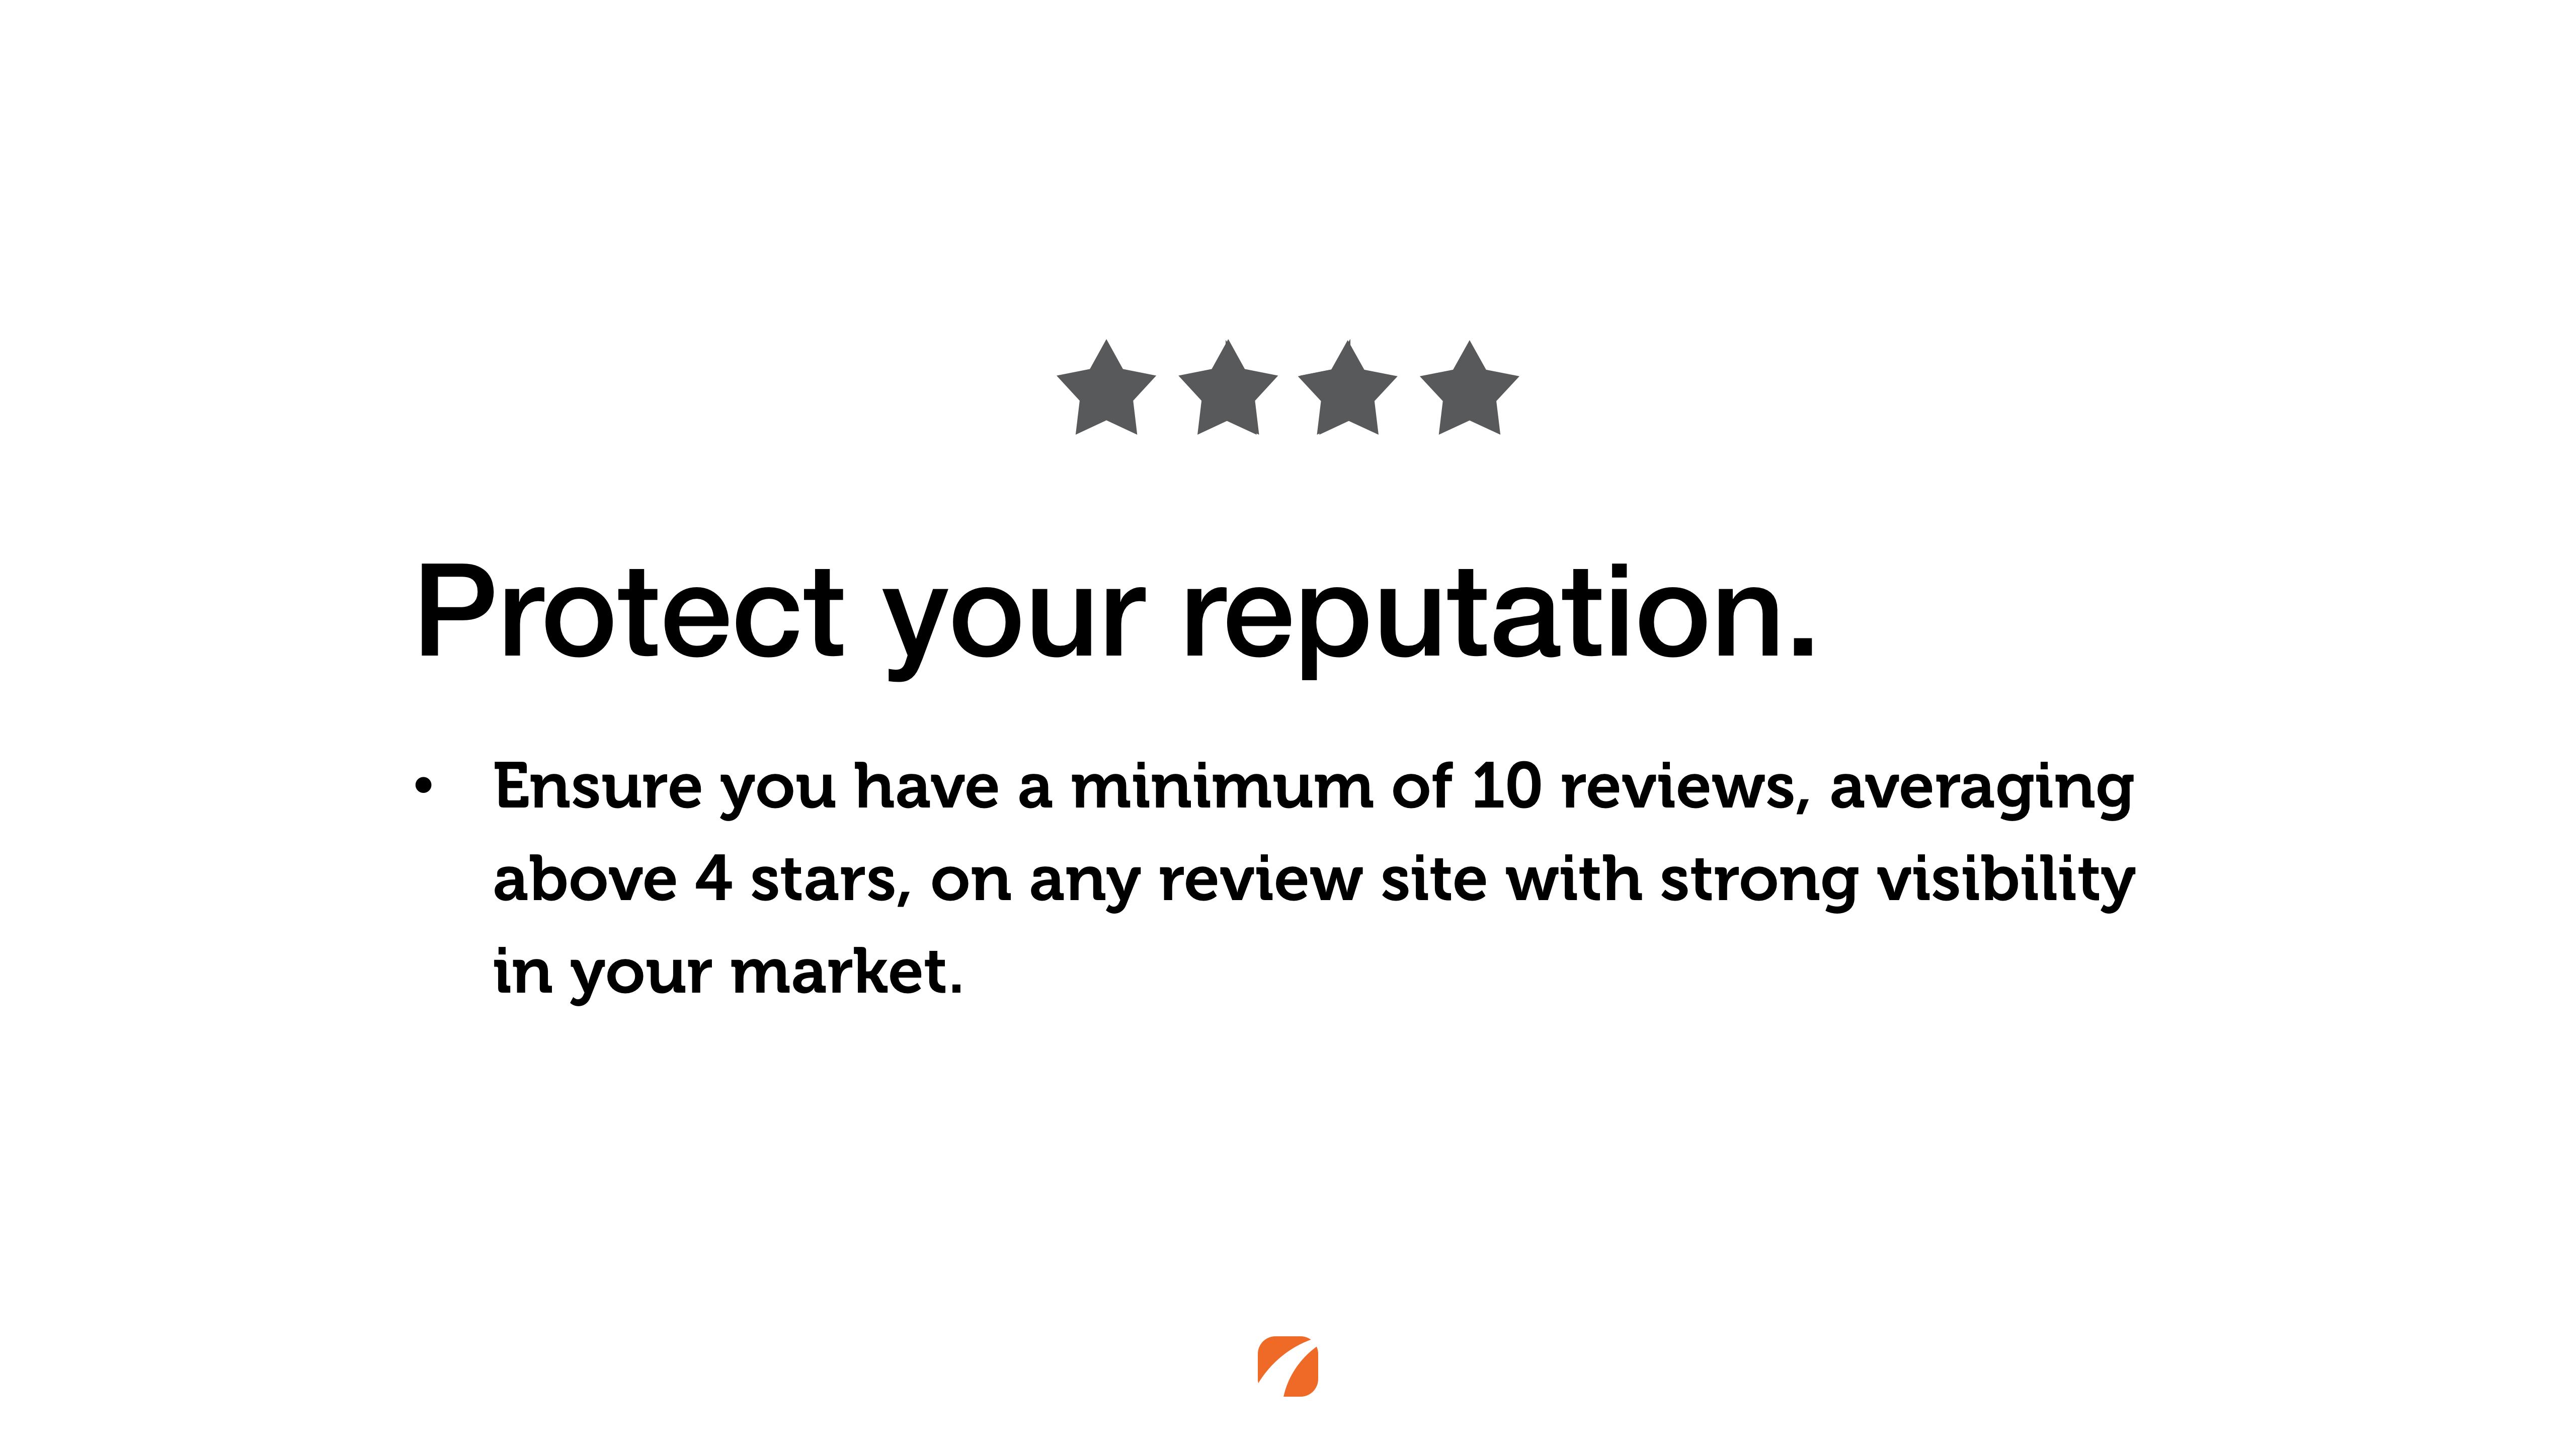 Protect your reputation. Ensure you have a minimum of 10 reviews, averaging above 4 stars, on any review site with strong visibility in your market.